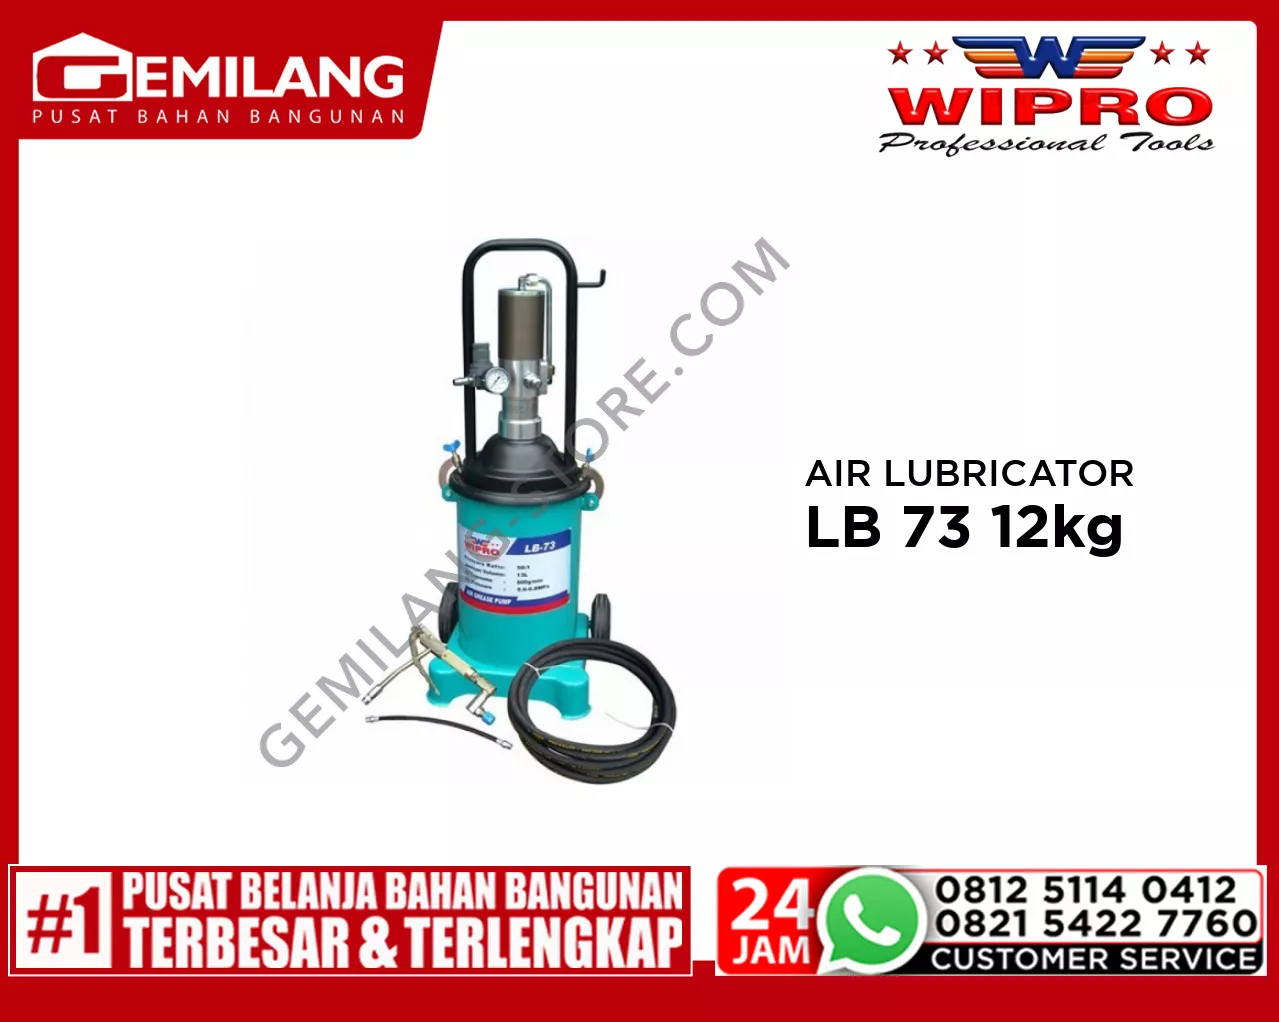 WIPRO AIR LUBRICATOR GREASE LB 73 (12kg)